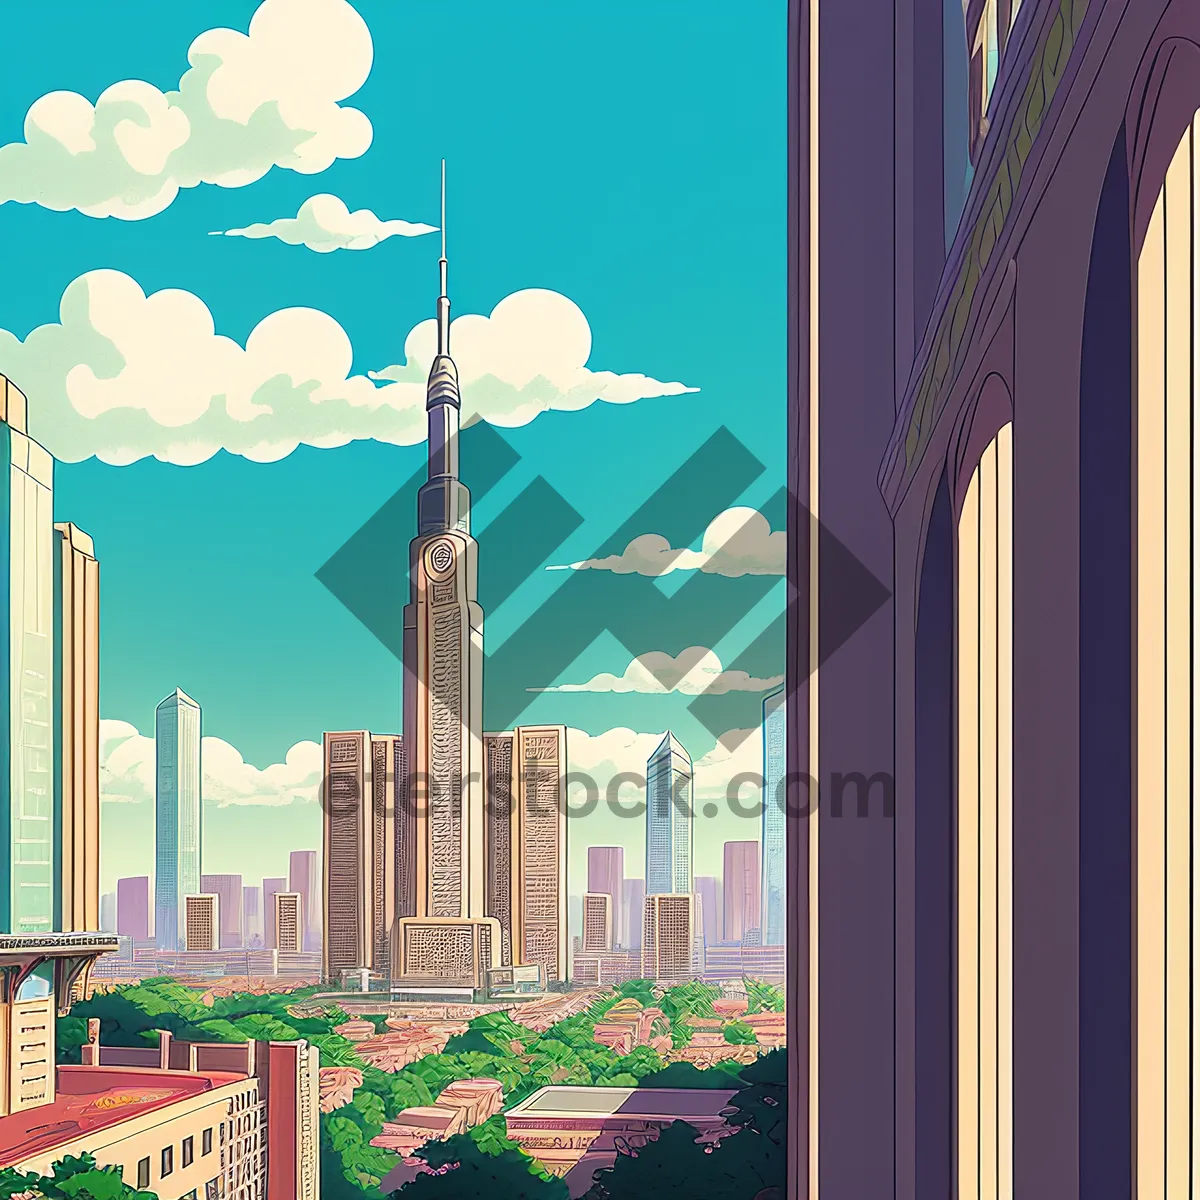 Picture of Contemporary urban skyline characterized by towering glass skyscrapers